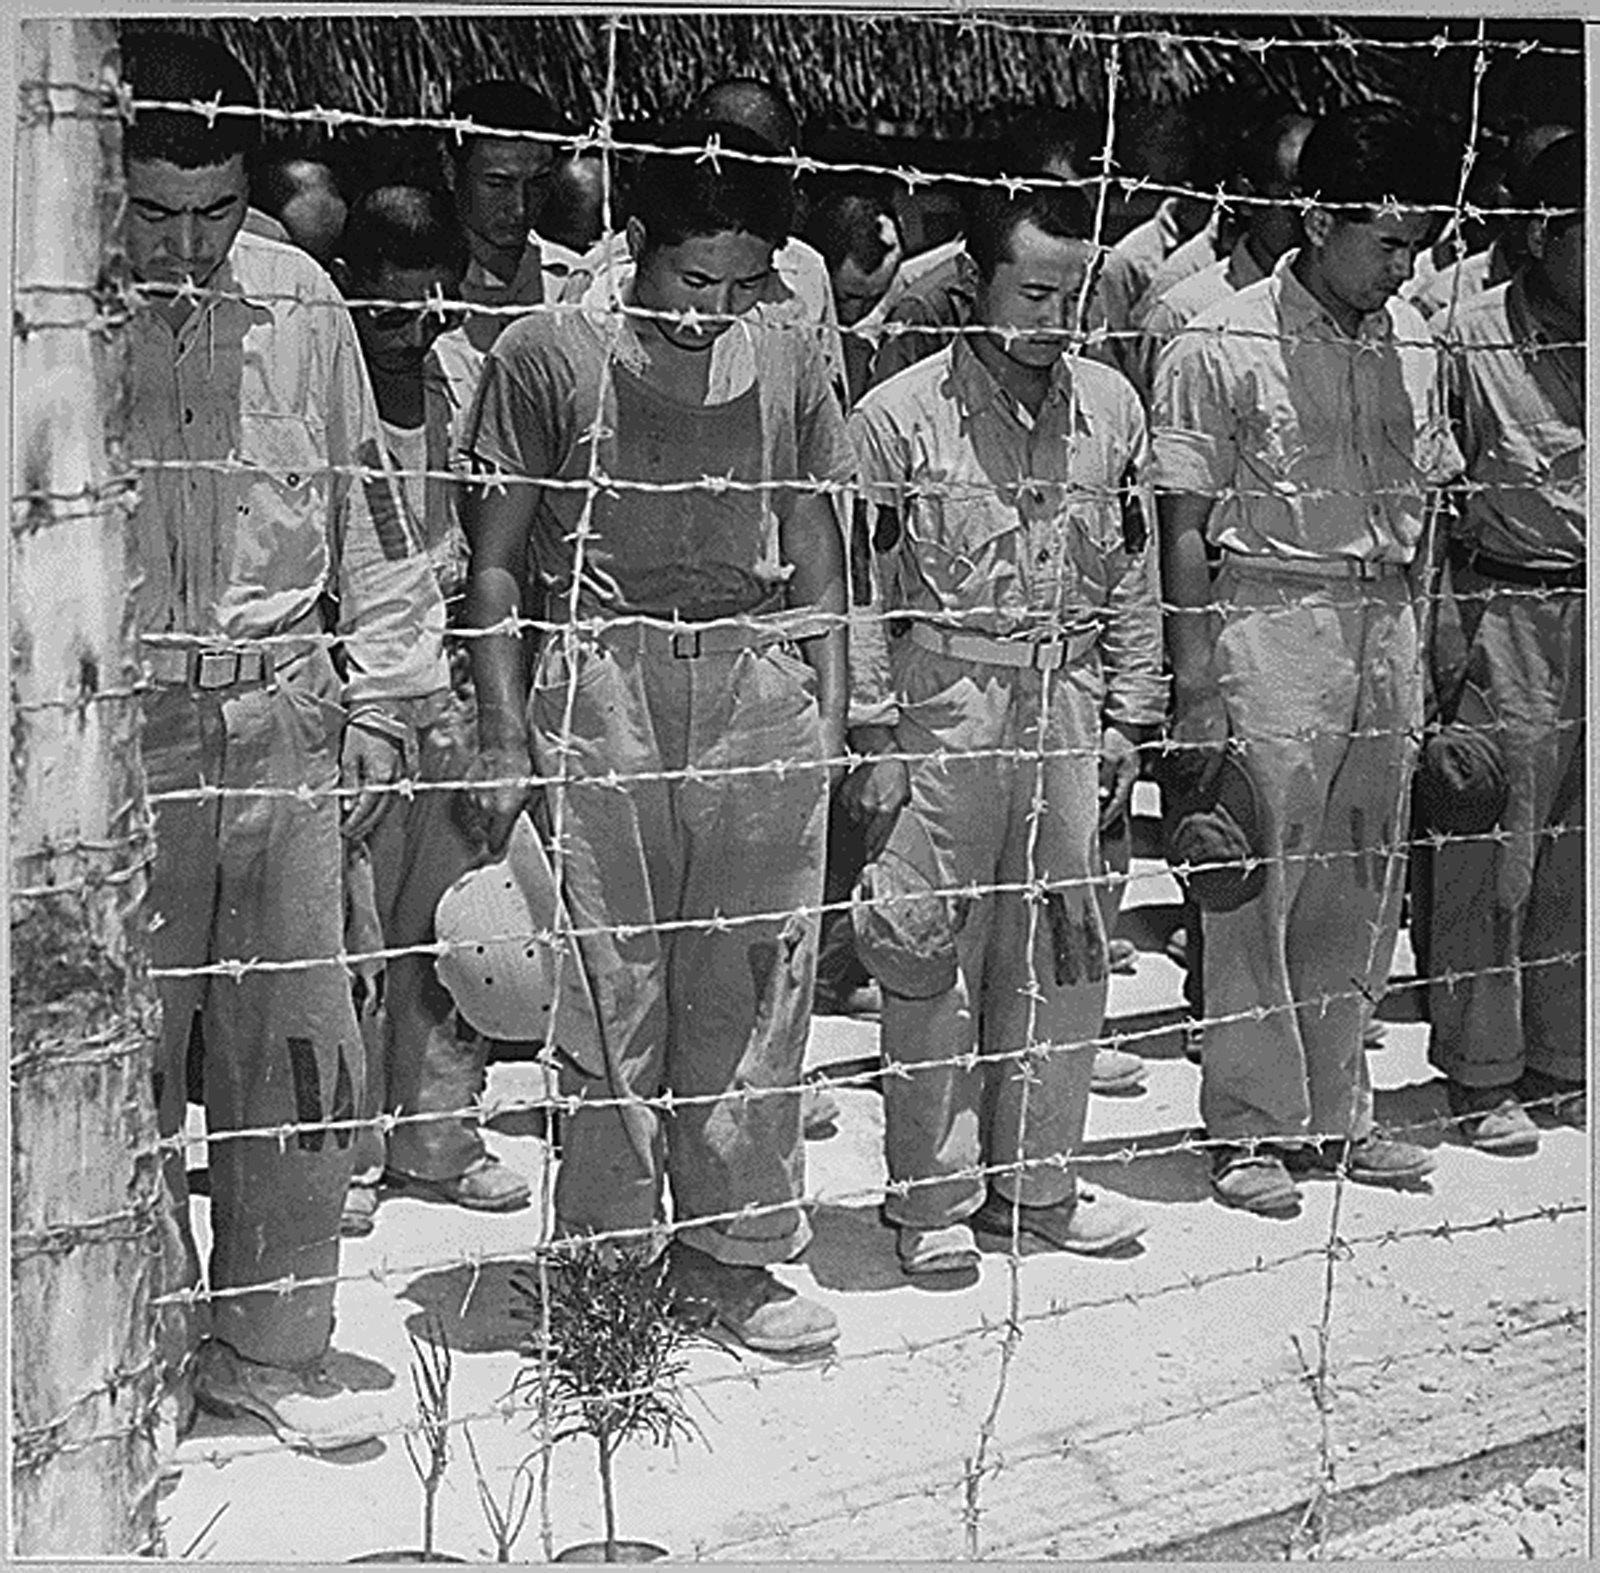 epa04867685 A handout image made available by the US National Archives and Records Administration (NARA) of Japanese Prisoners of War with bowed heads after hearing Emperor Hirohito making the announcement of Japan's unconditional surrender, at a POW center in Guam, 15 August 1945. 06 August 2015 marks the 70th anniversary of the atomic bombing on Hiroshima. The US B-29 Superfortress bomber Enola Gay dropped an atomic bomb codenamed 'Little Boy' on Hiroshima on 06 August 1945, killing tens of thousands of people in seconds. By the end of the year, 140,000 people had died from the effects of the bomb. On 09 August 1945 a second atomic bomb was exploded over Nagasaki, killing more than 73,000 people. The 'Little Boy' was the first ever nuclear bomb dropped on a city and a crucial turn that led to Japan's surrender in WWII.  EPA/US NATIONAL ARCHIVES / HANDOUT  HANDOUT EDITORIAL USE ONLY